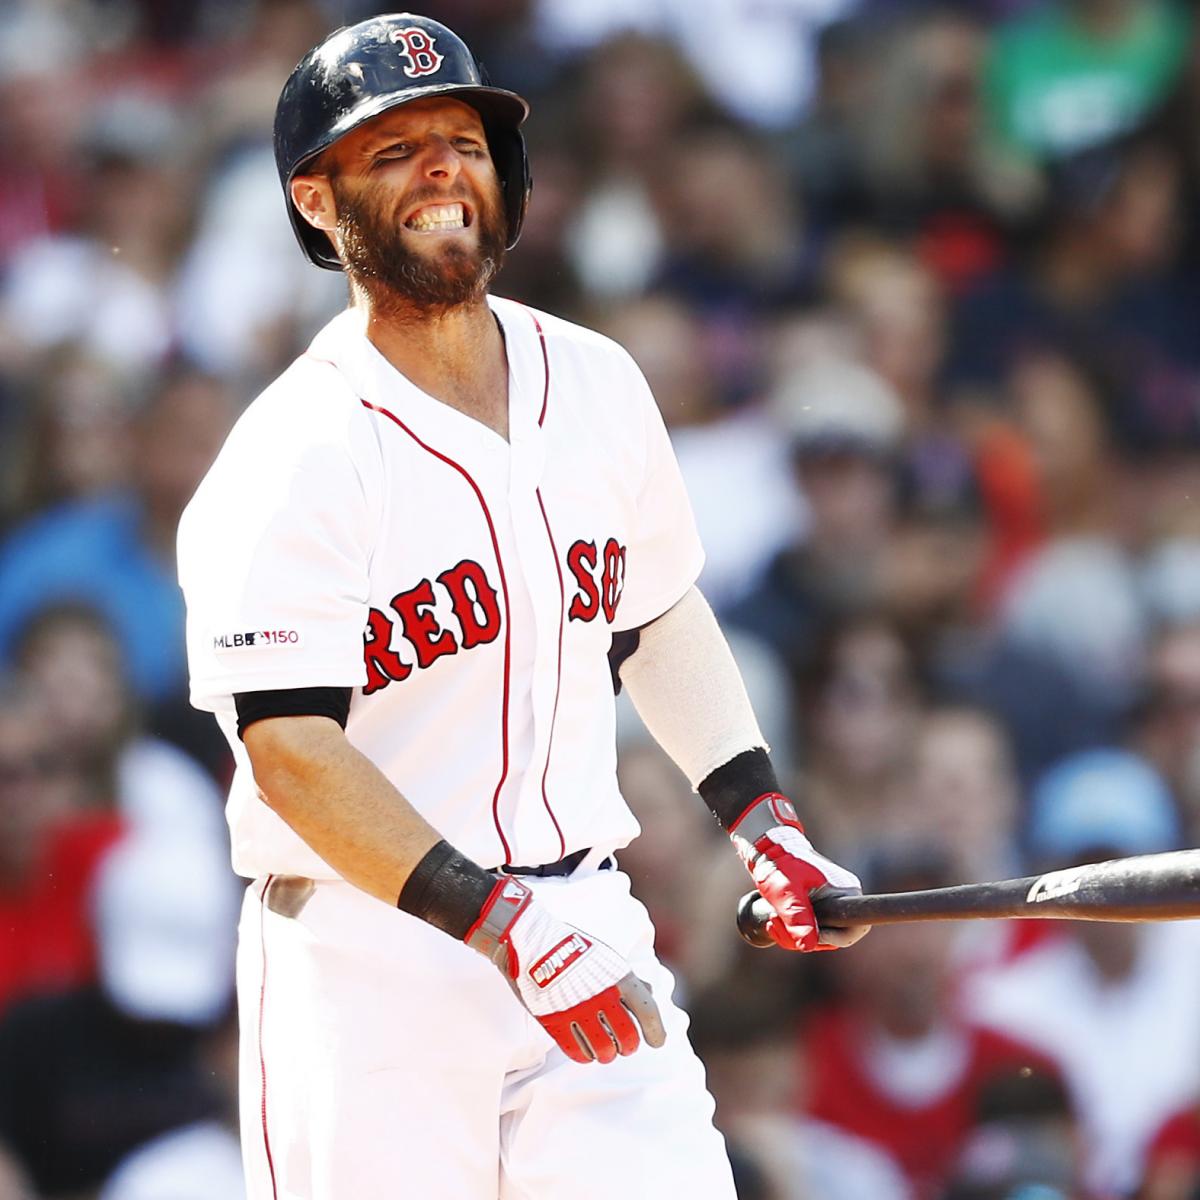 He may not turn heads at Subway, but Dustin Pedroia left his mark